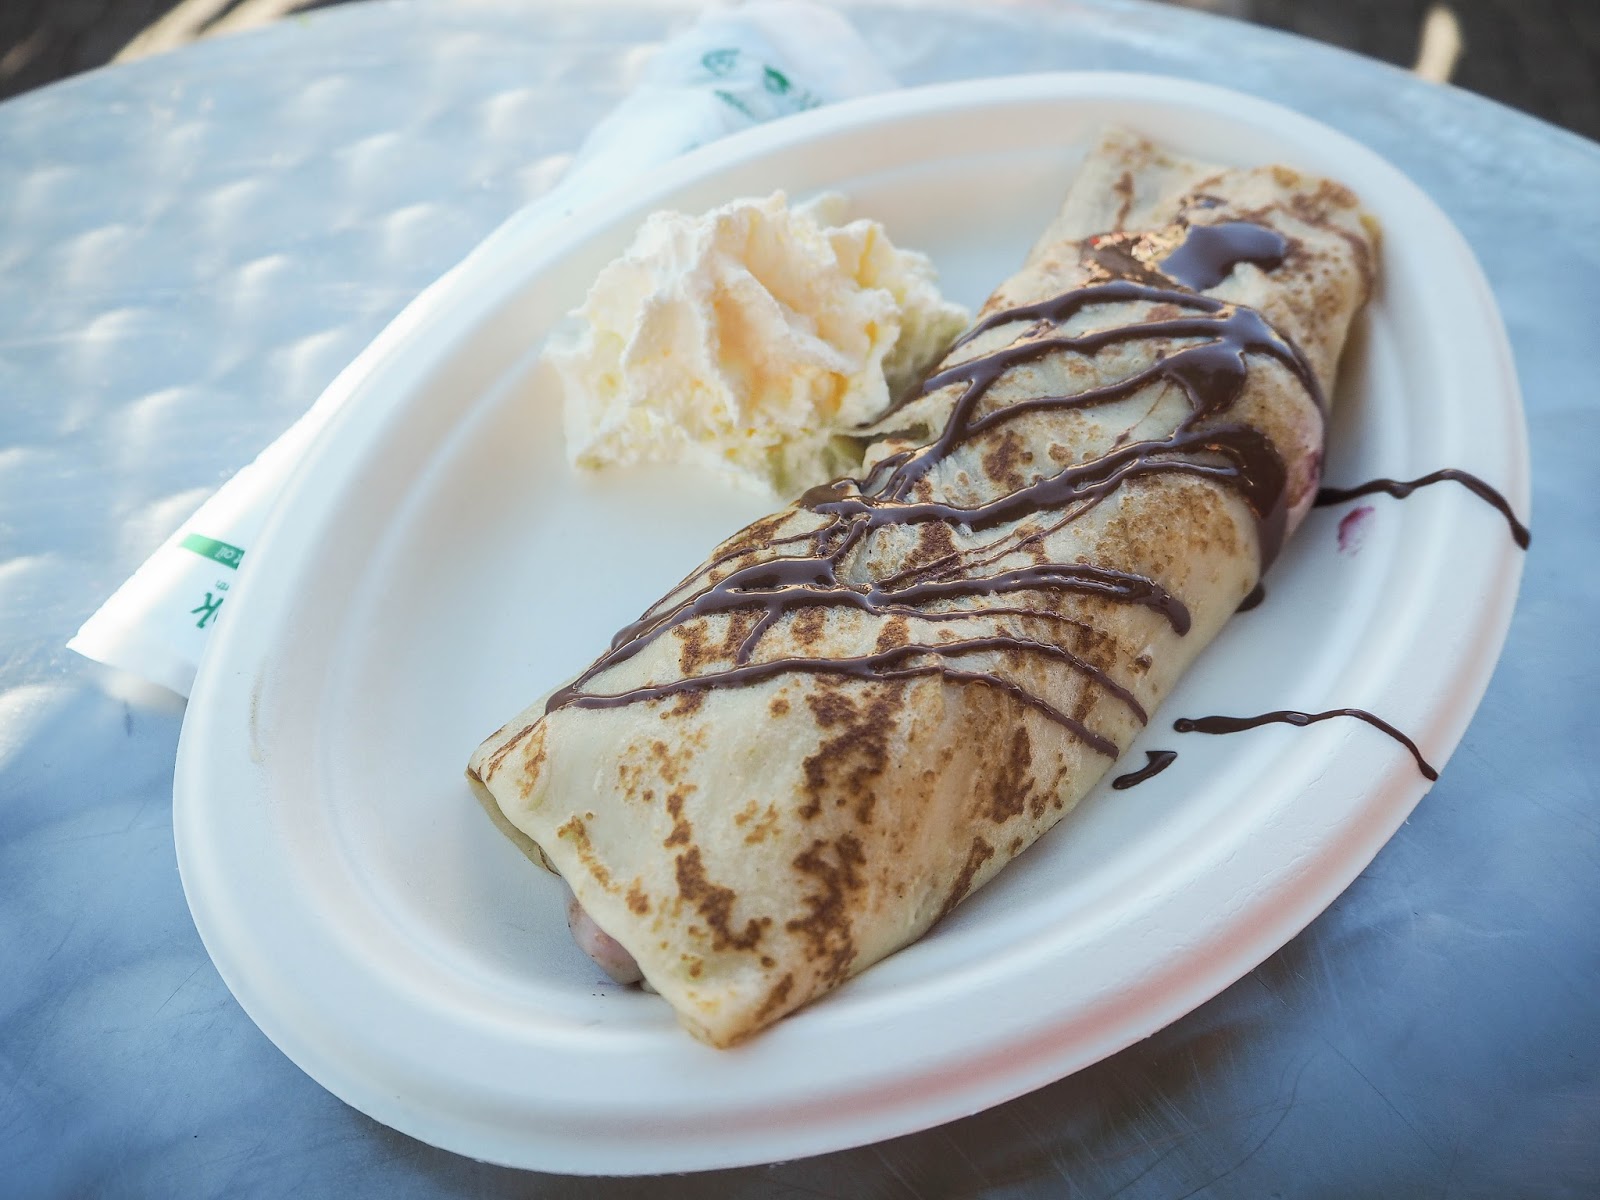 Crepe with chocolate sauce and whipped cream